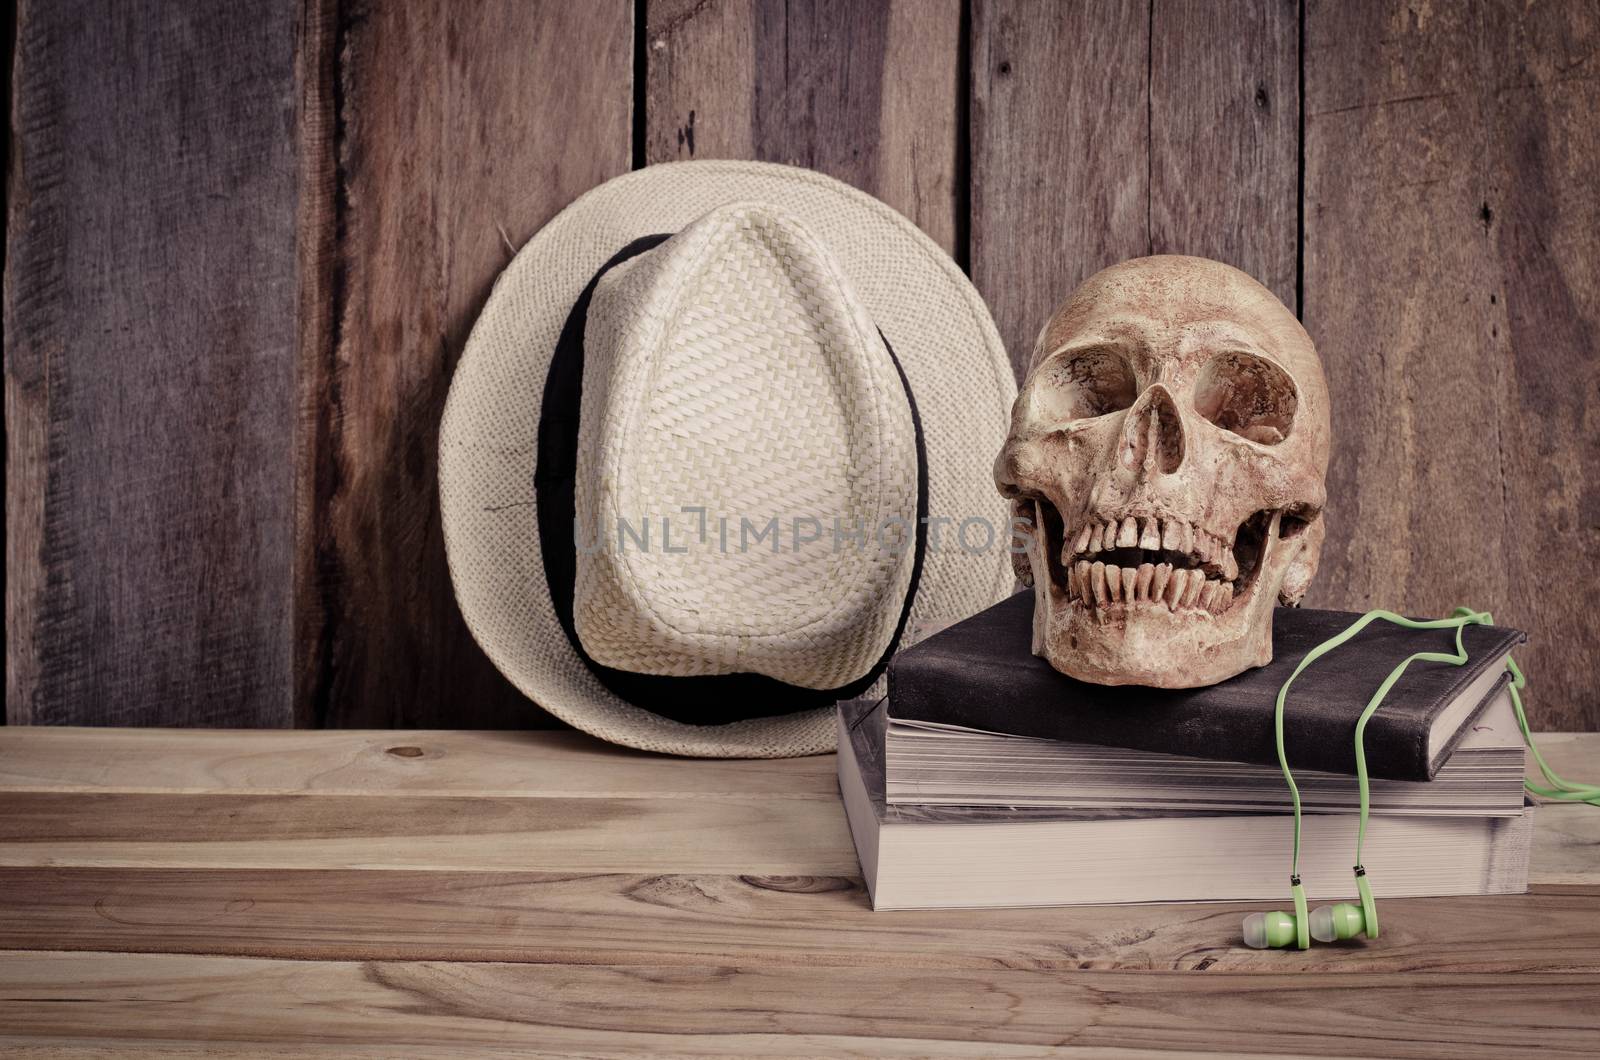 still life - skull on books and hat on wooden table by photobyphotoboy